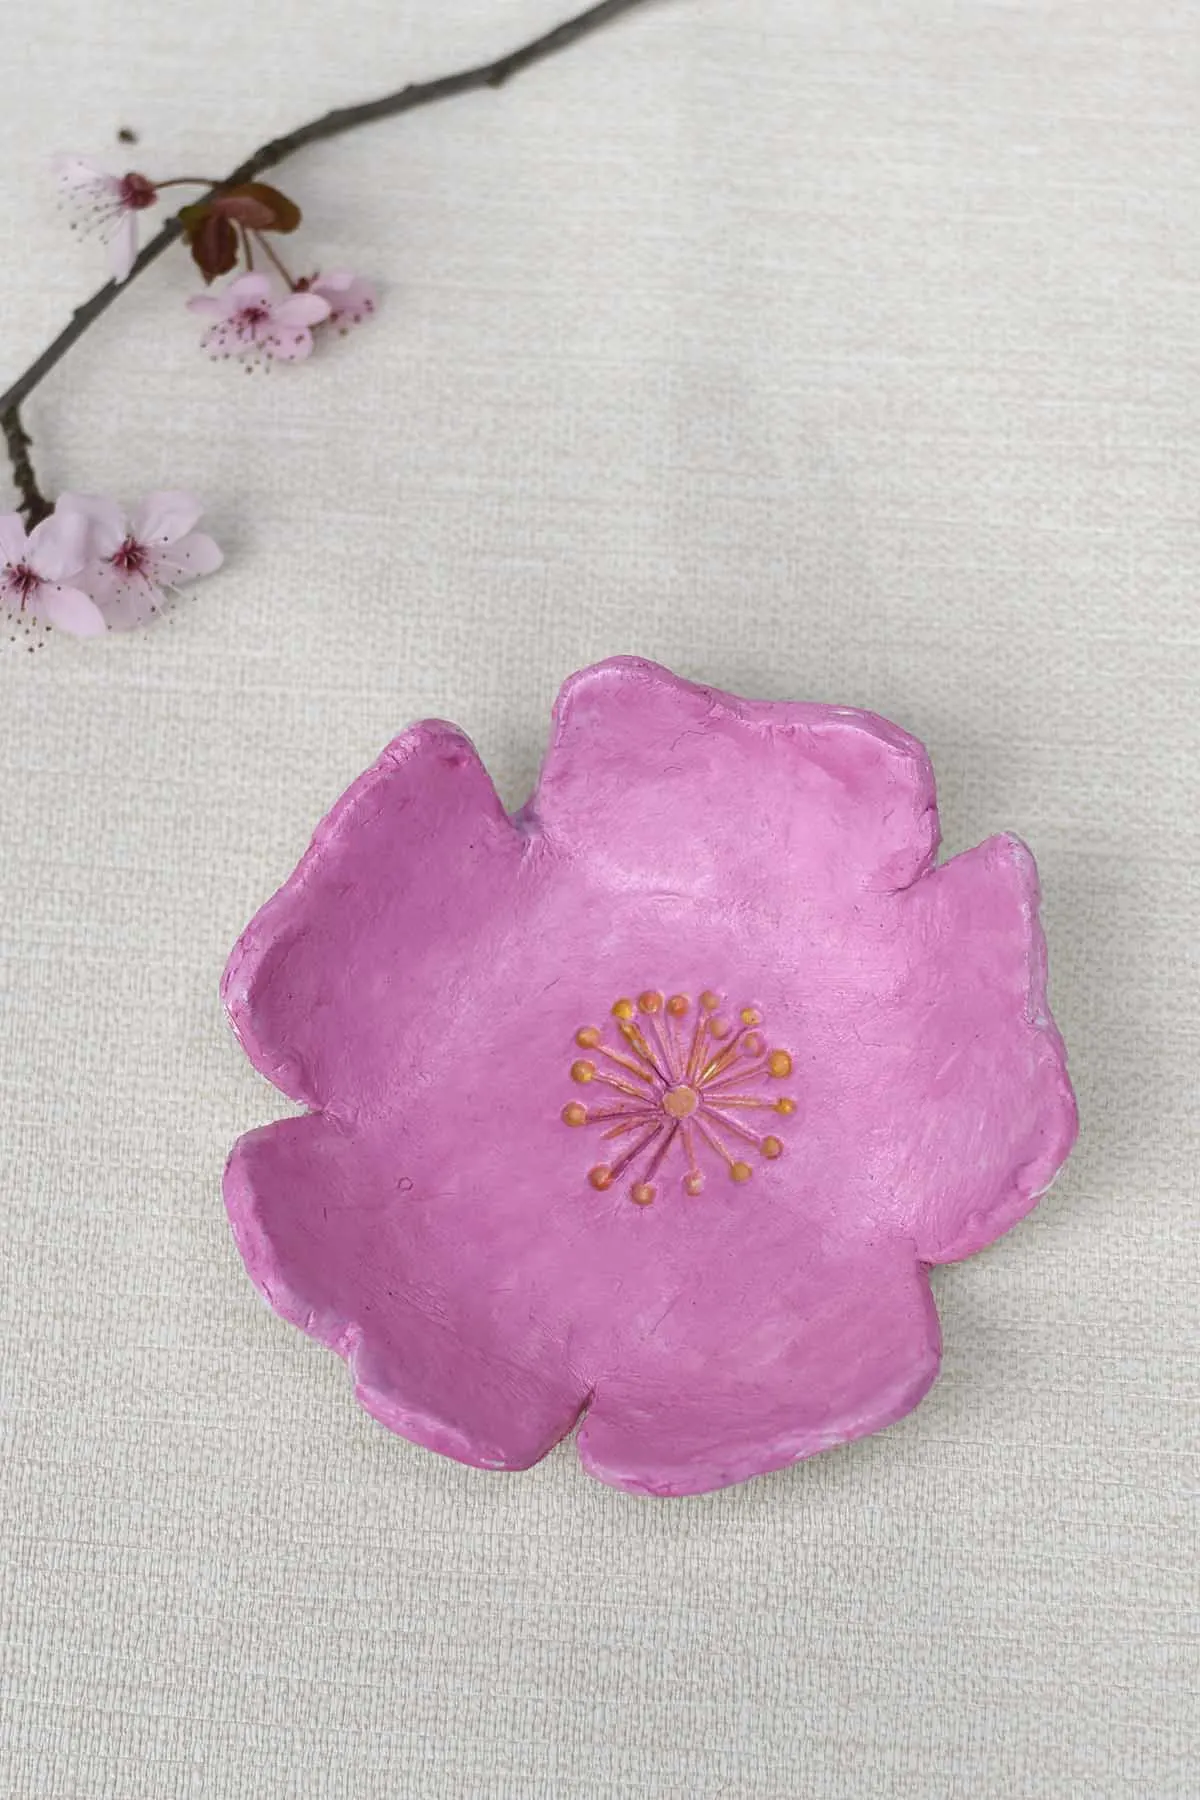 Air dry clay trinket dish in the shape of cherry blossom